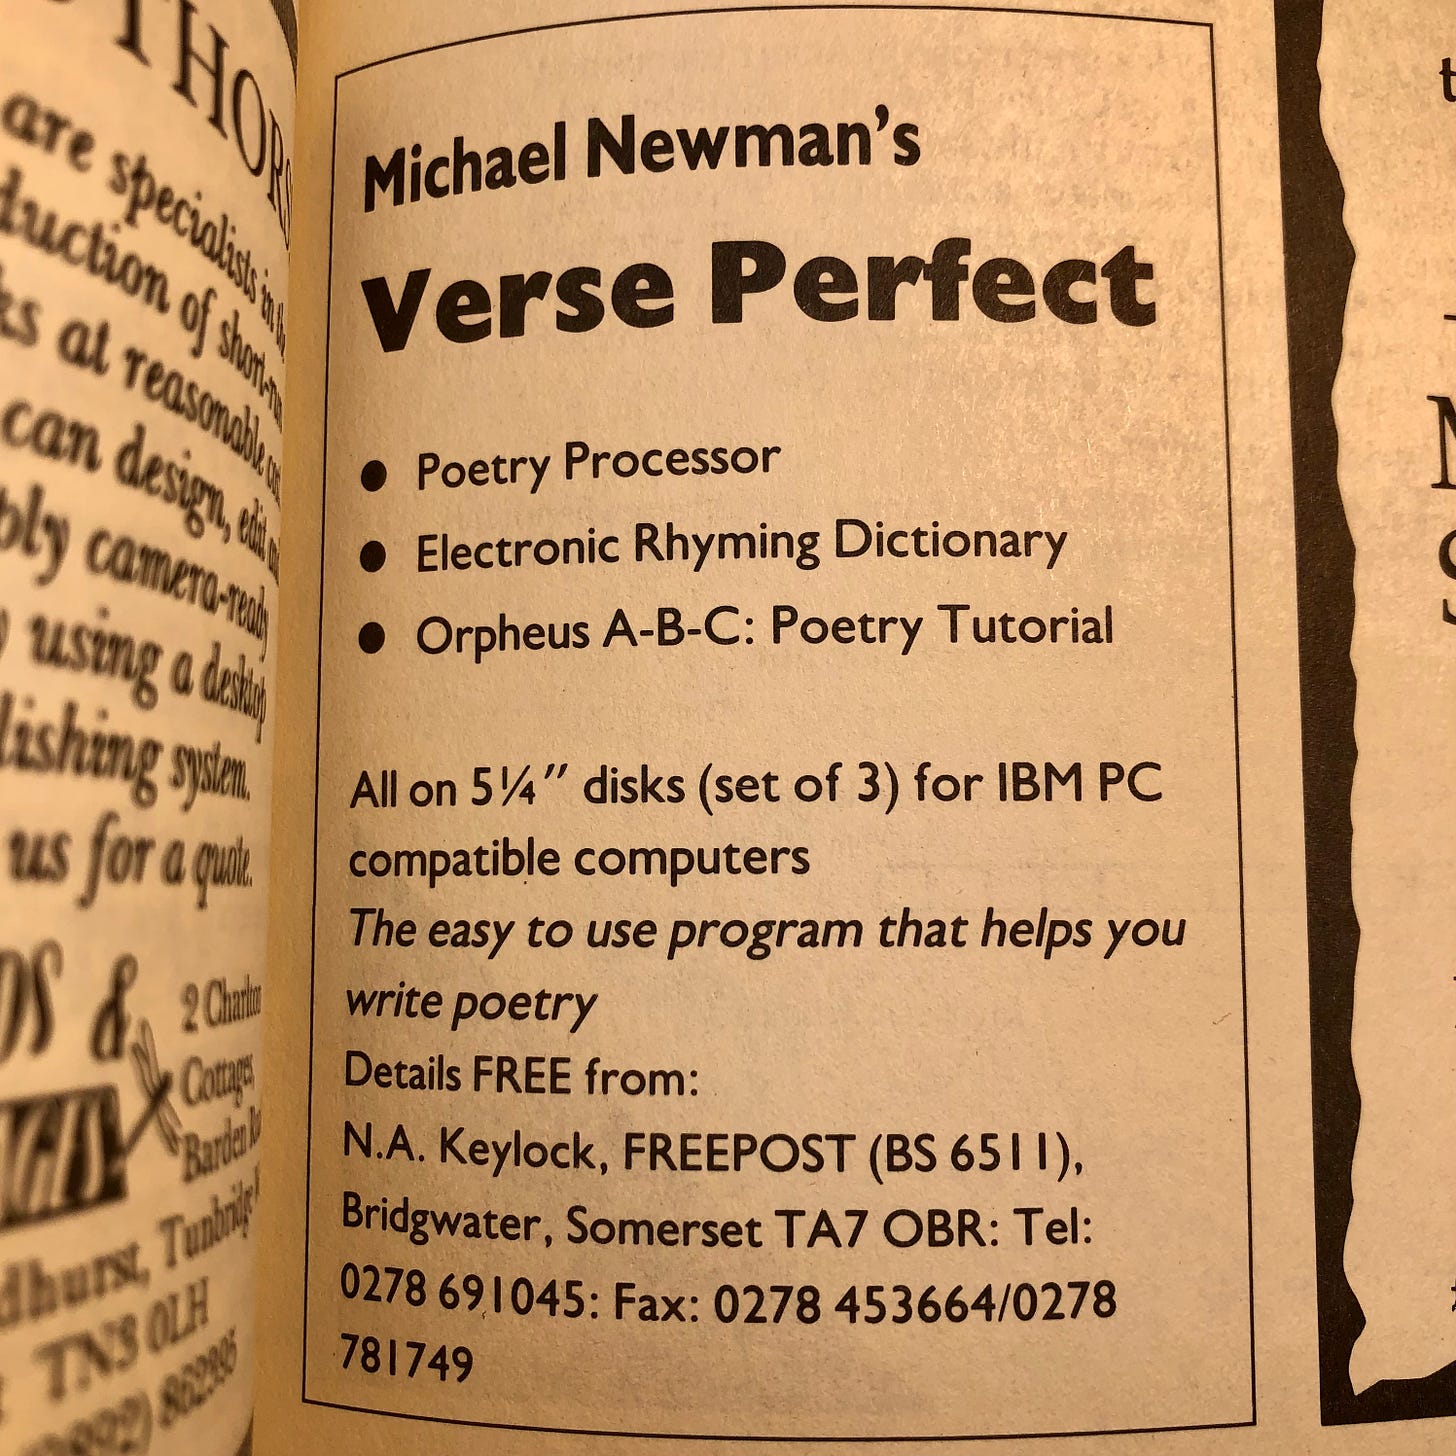 Printed box ad for Michael Newman's Verse Perfect software package, offering a set of 3 disks by post